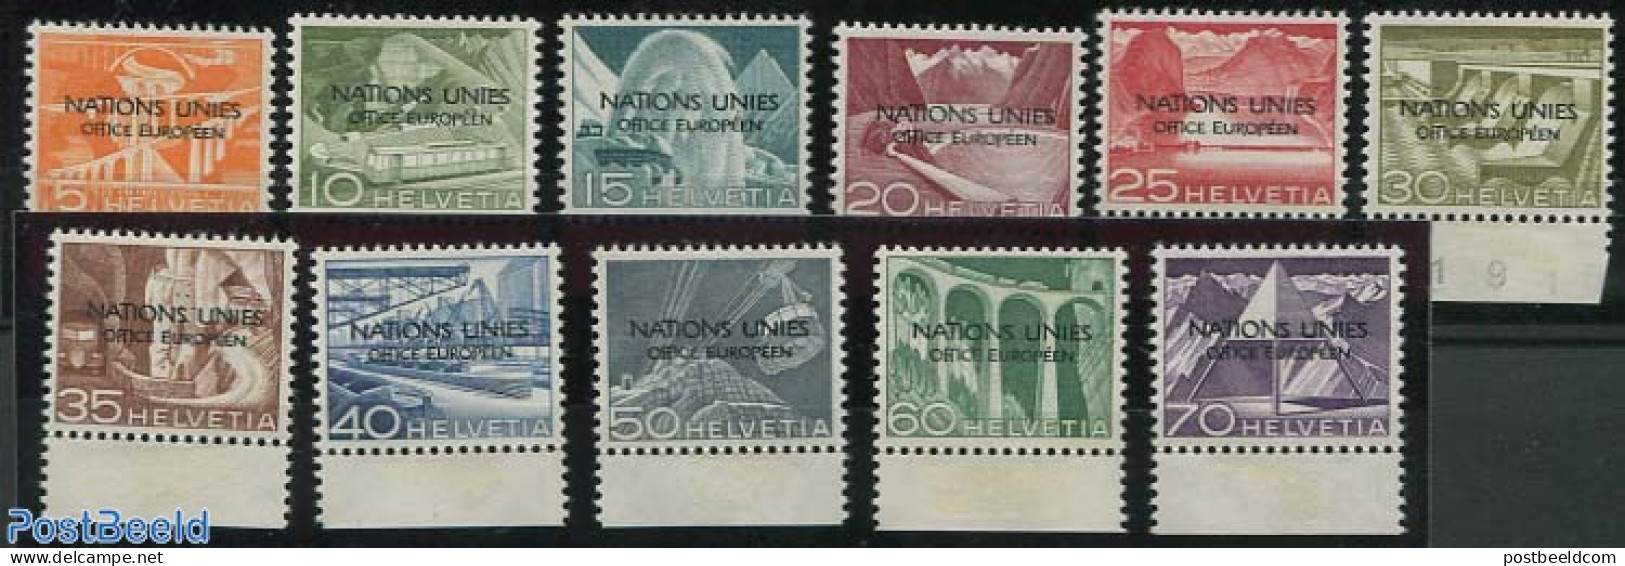 Switzerland 1950 UNO Office 11v, Overprint Variety: OF[ICE, Mint NH, Nature - Transport - Various - Water, Dams & Fall.. - Nuovi